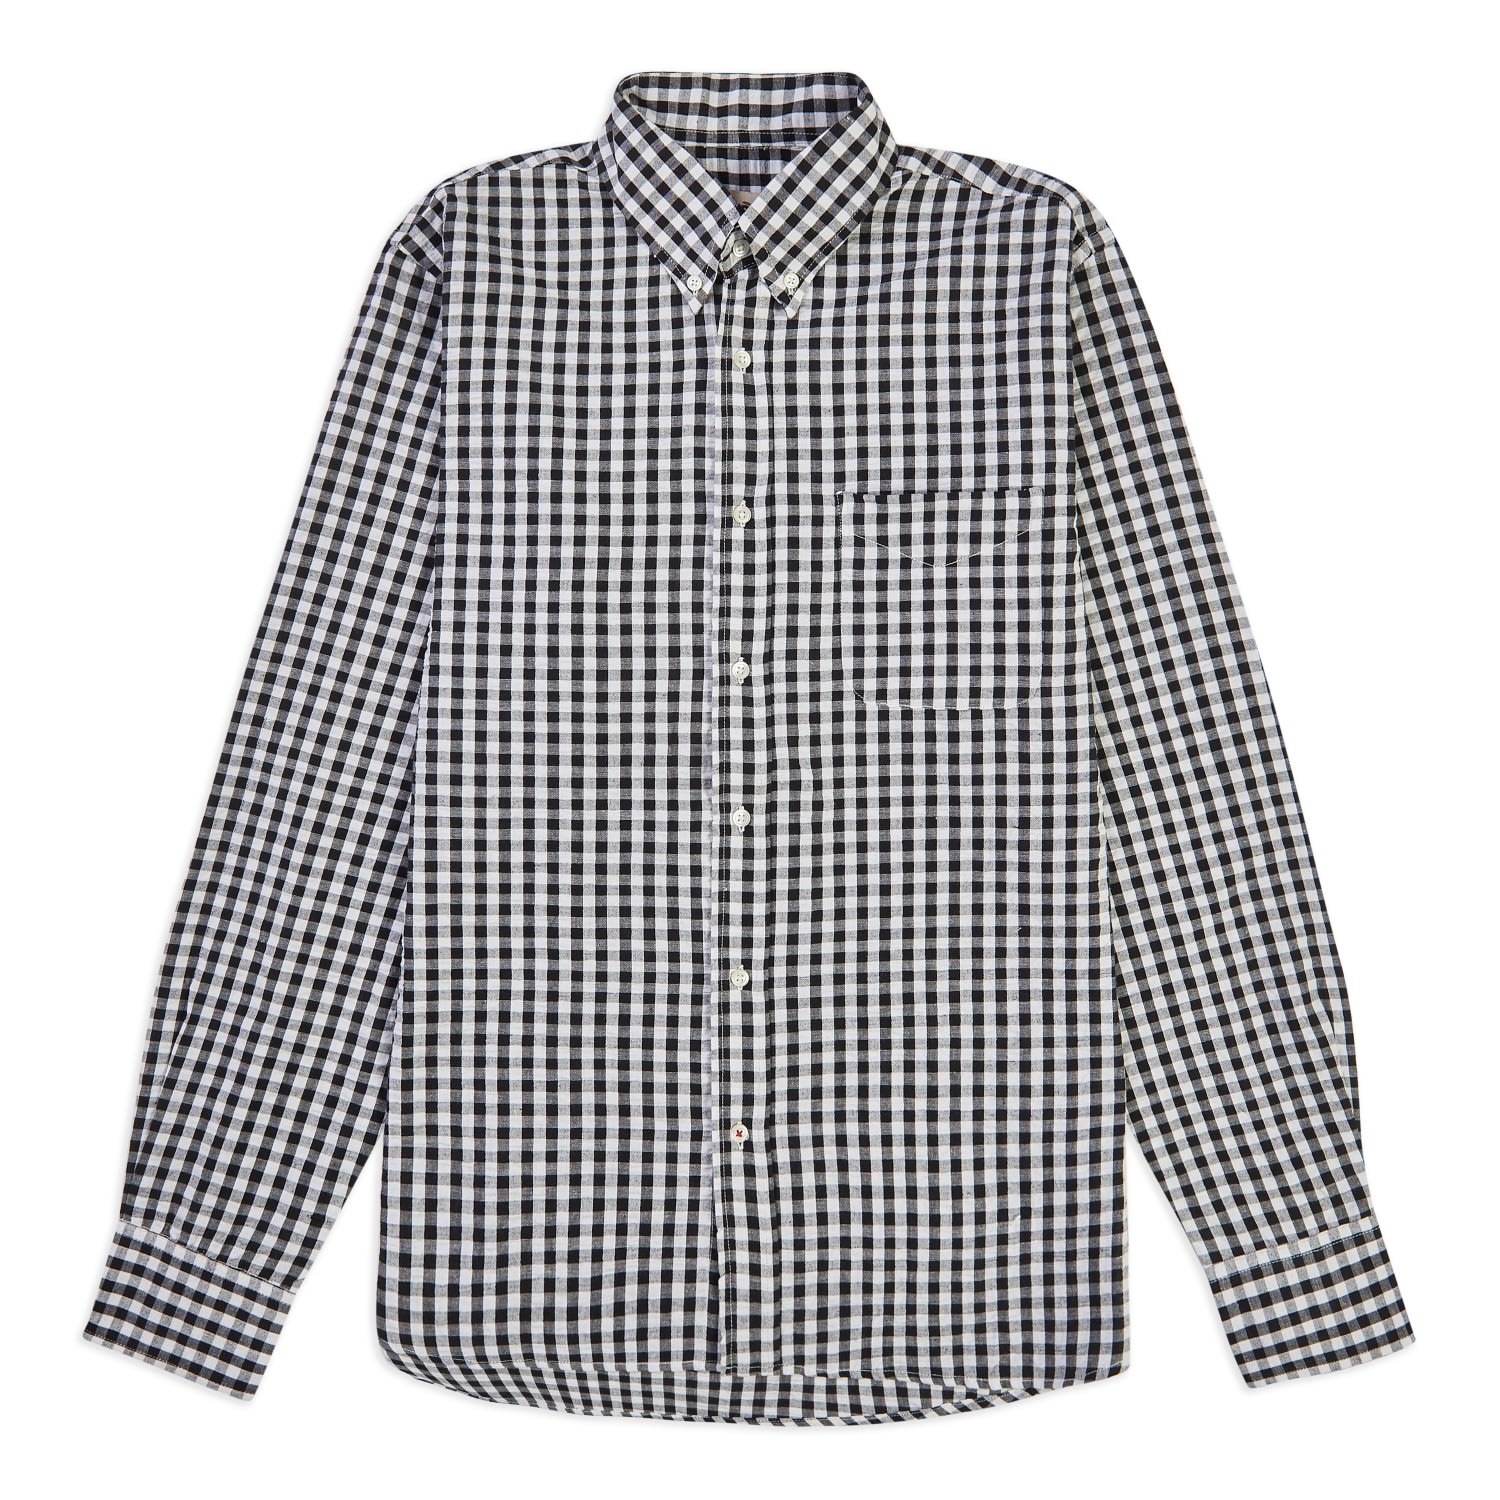 Men's Gingham Button Down Shirt - Black Small Burrows & Hare